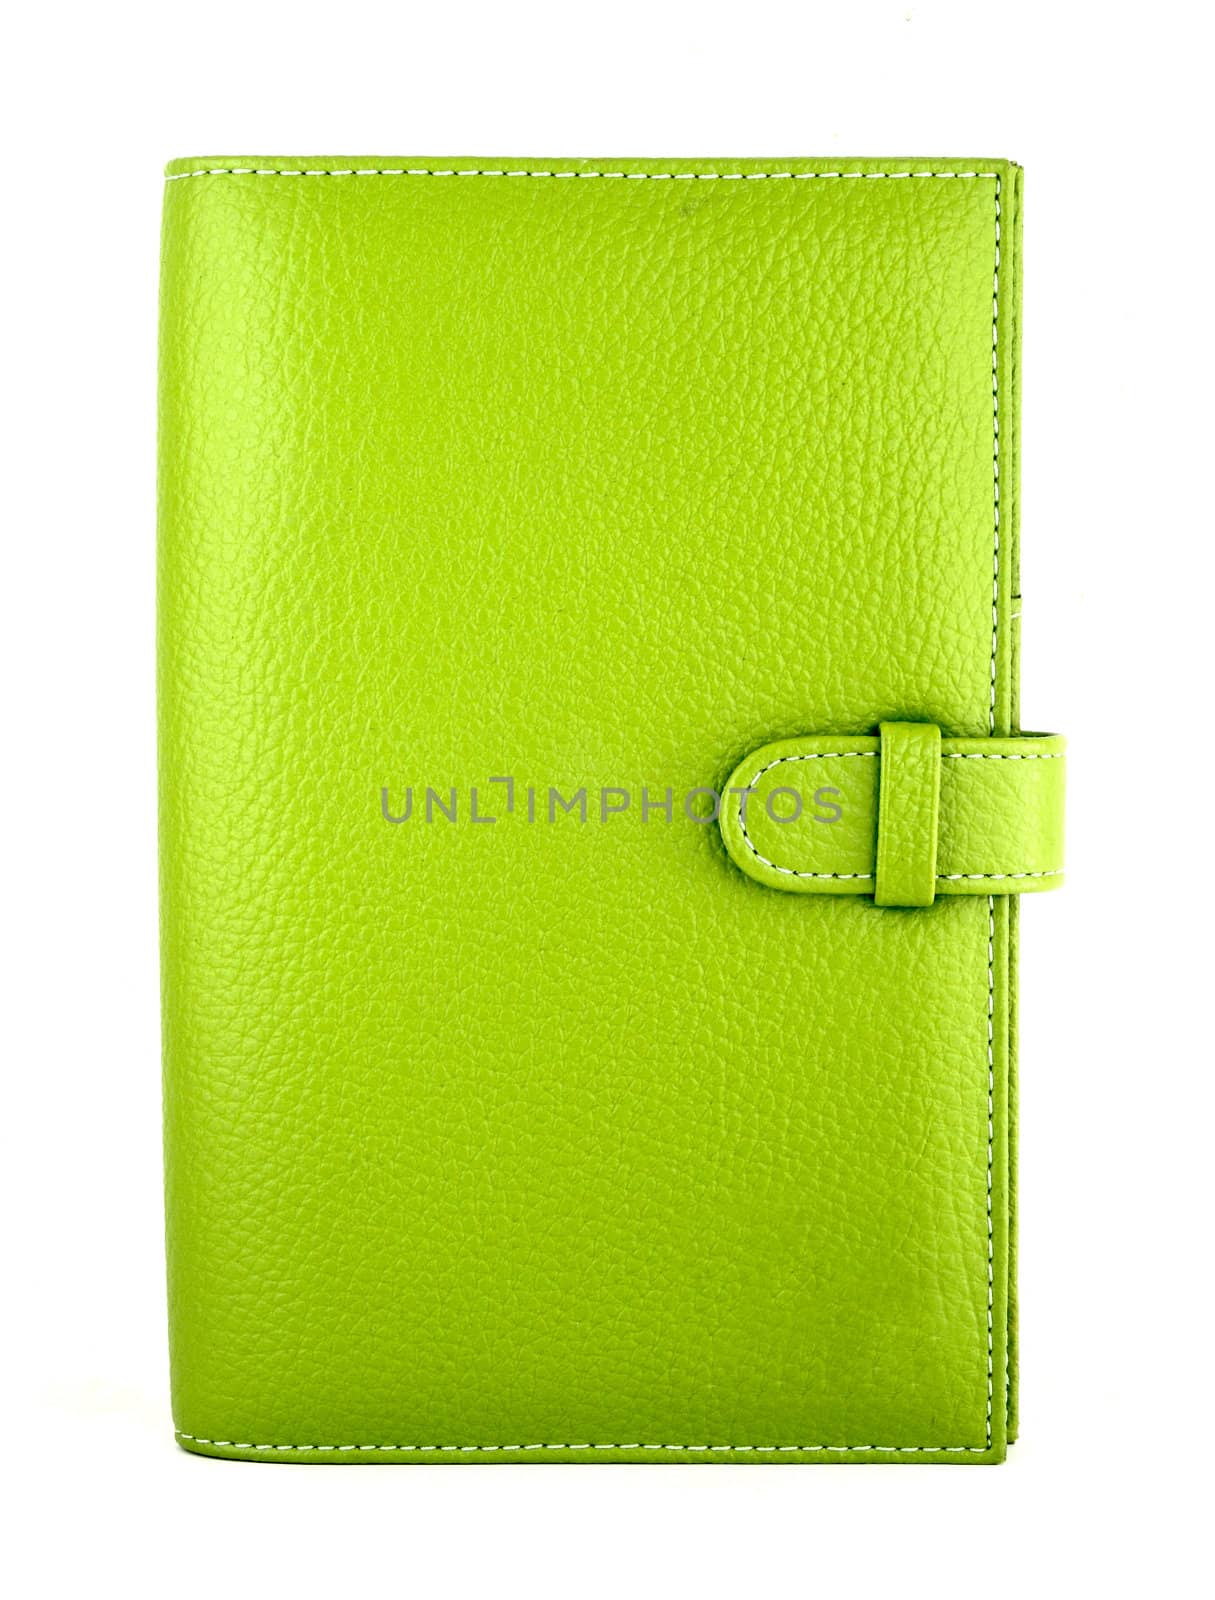 green purse on a white background by geargodz